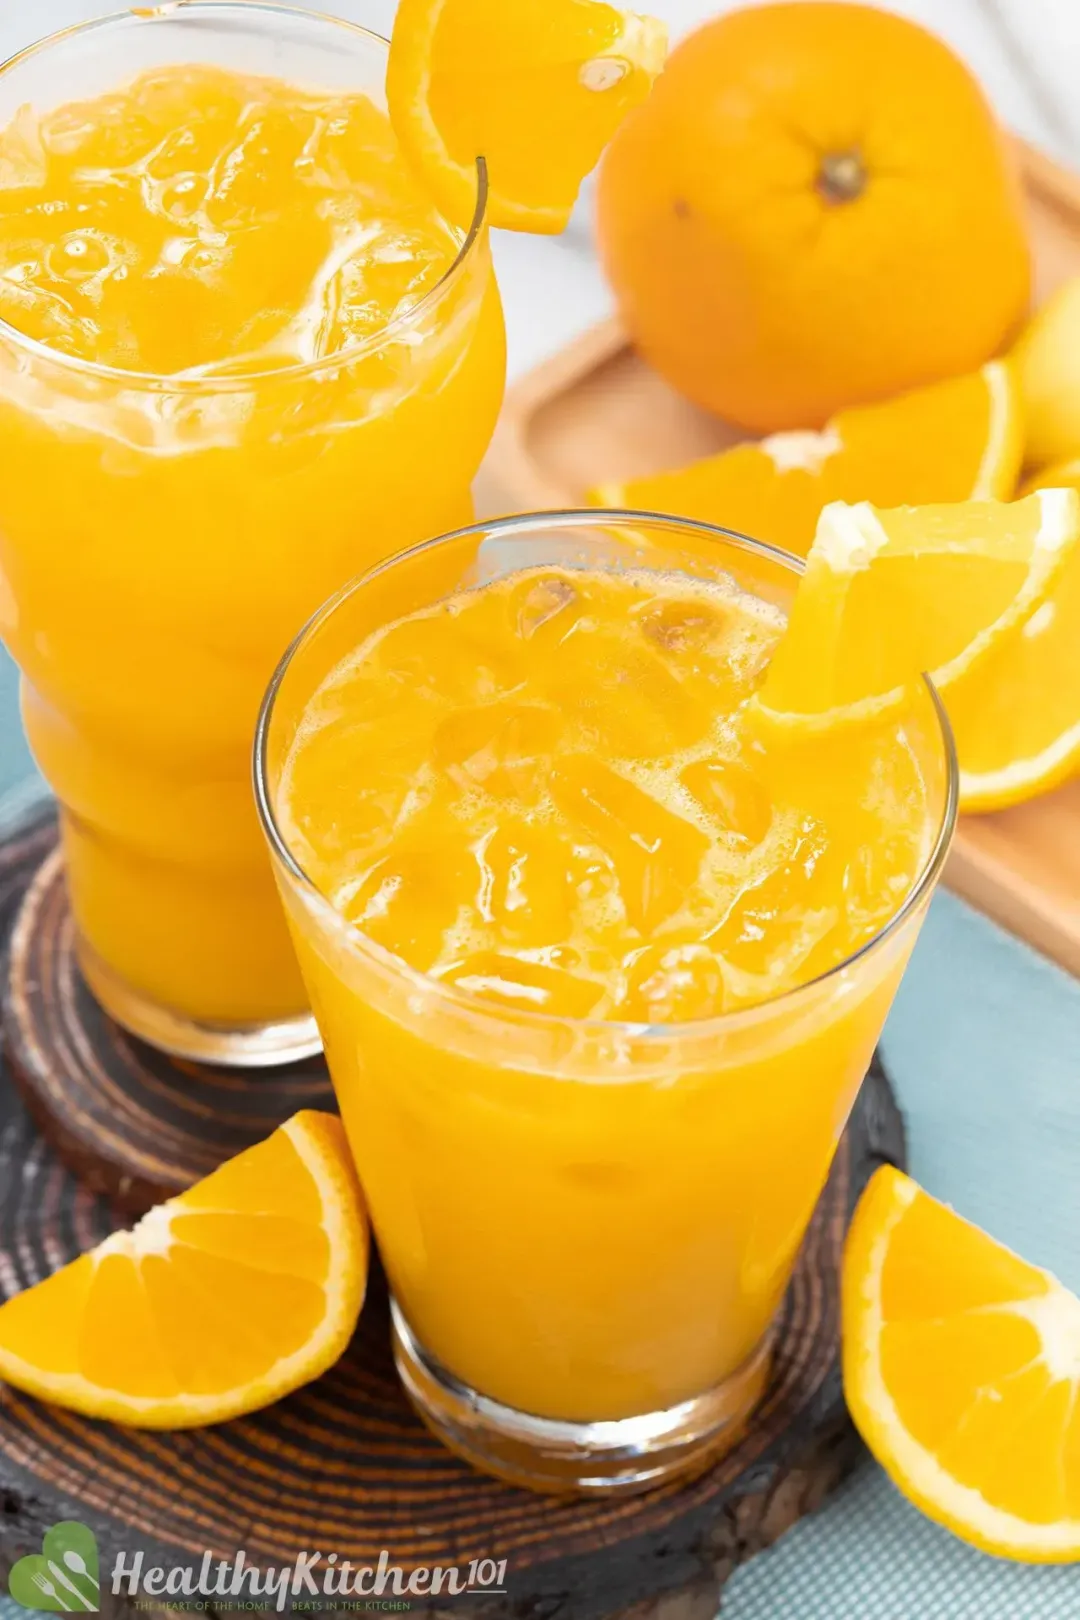 Two iced glasses of orange juice, garnished with lots of oranges in different shapes